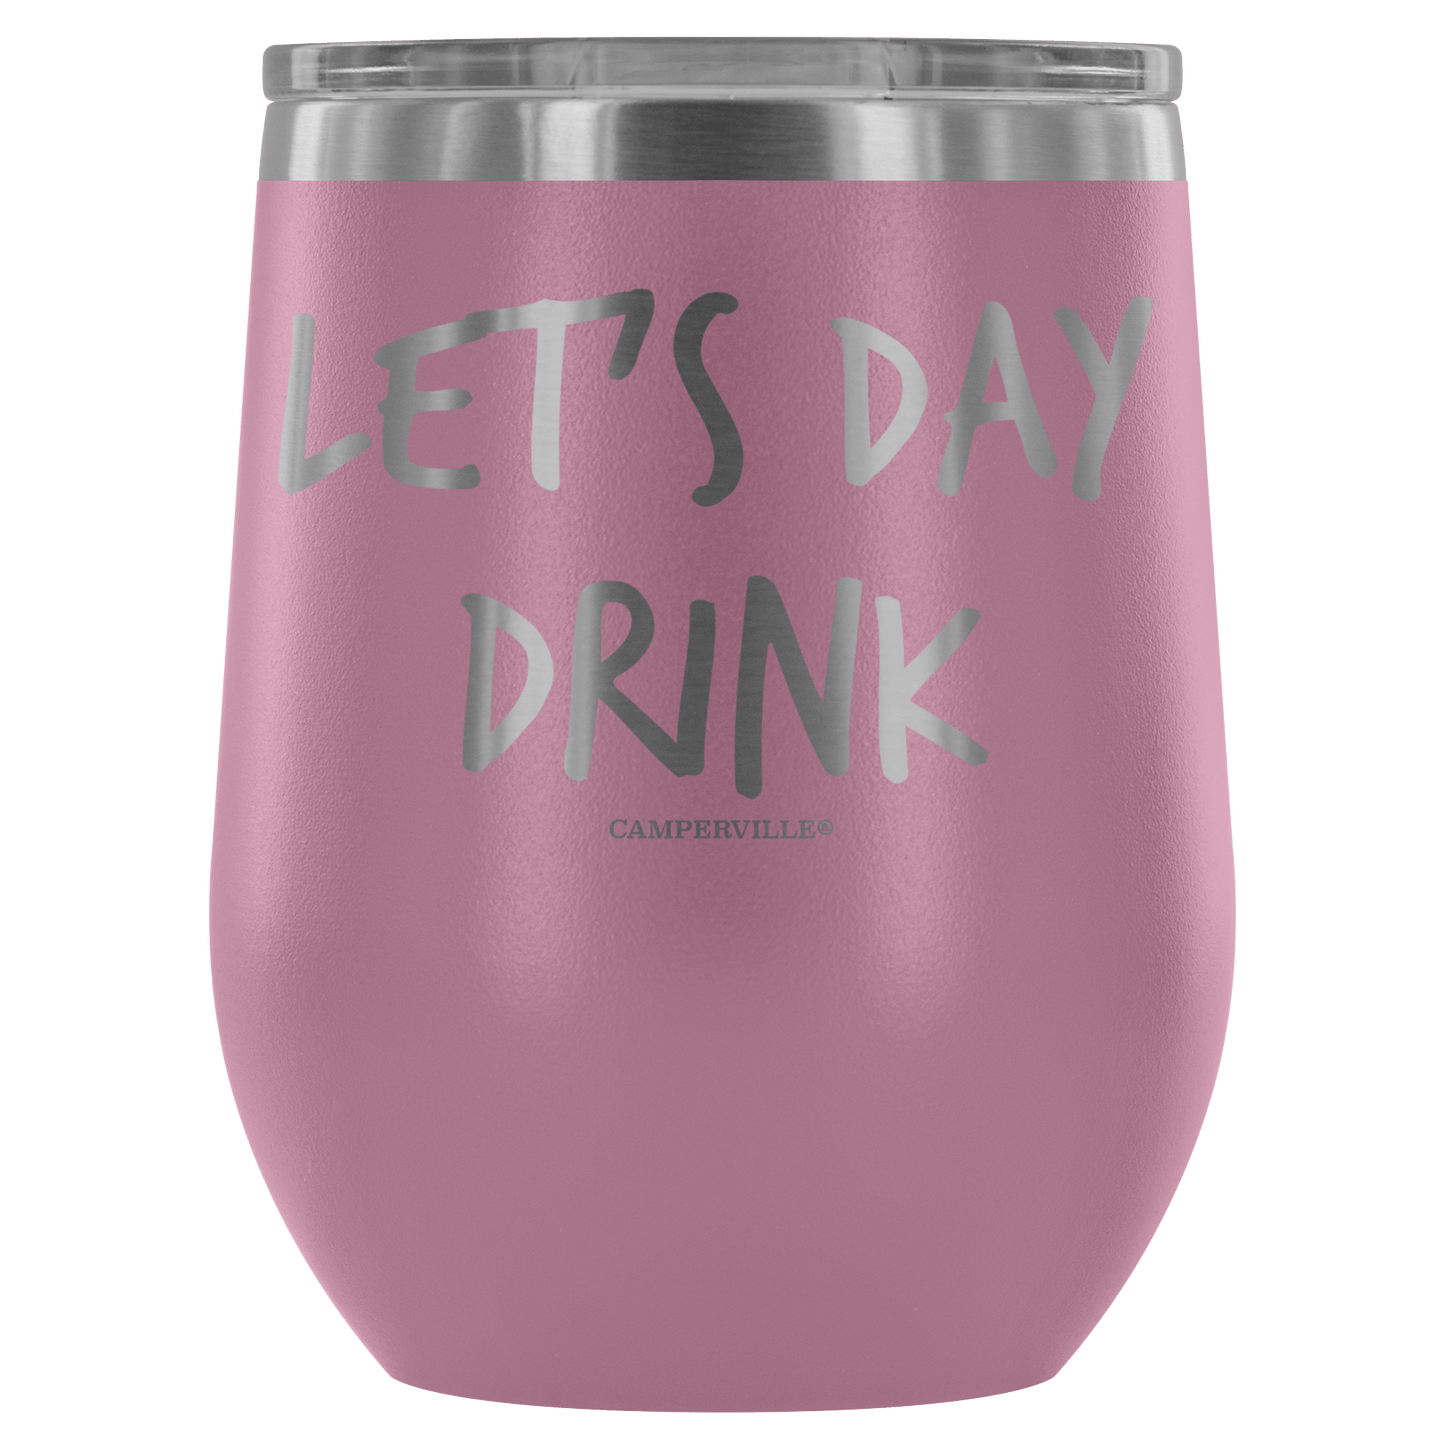 "Let's Day Drink" - Stemless Wine Cup